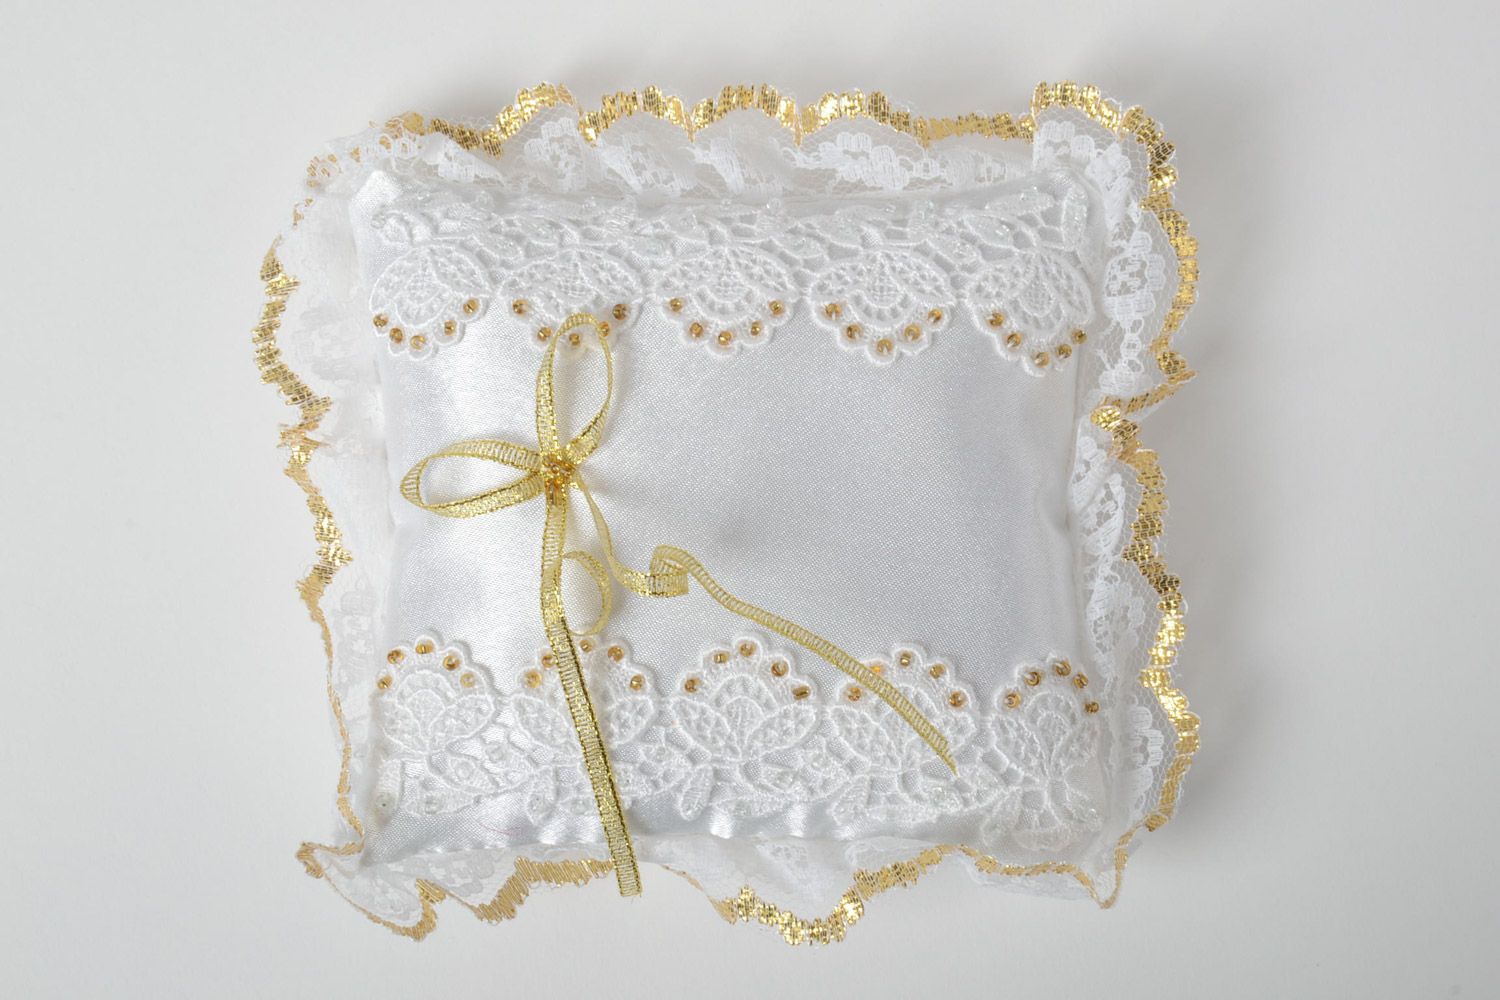 Handmade festive wedding rings pillow sewn of satin with lace and Czech beads photo 2